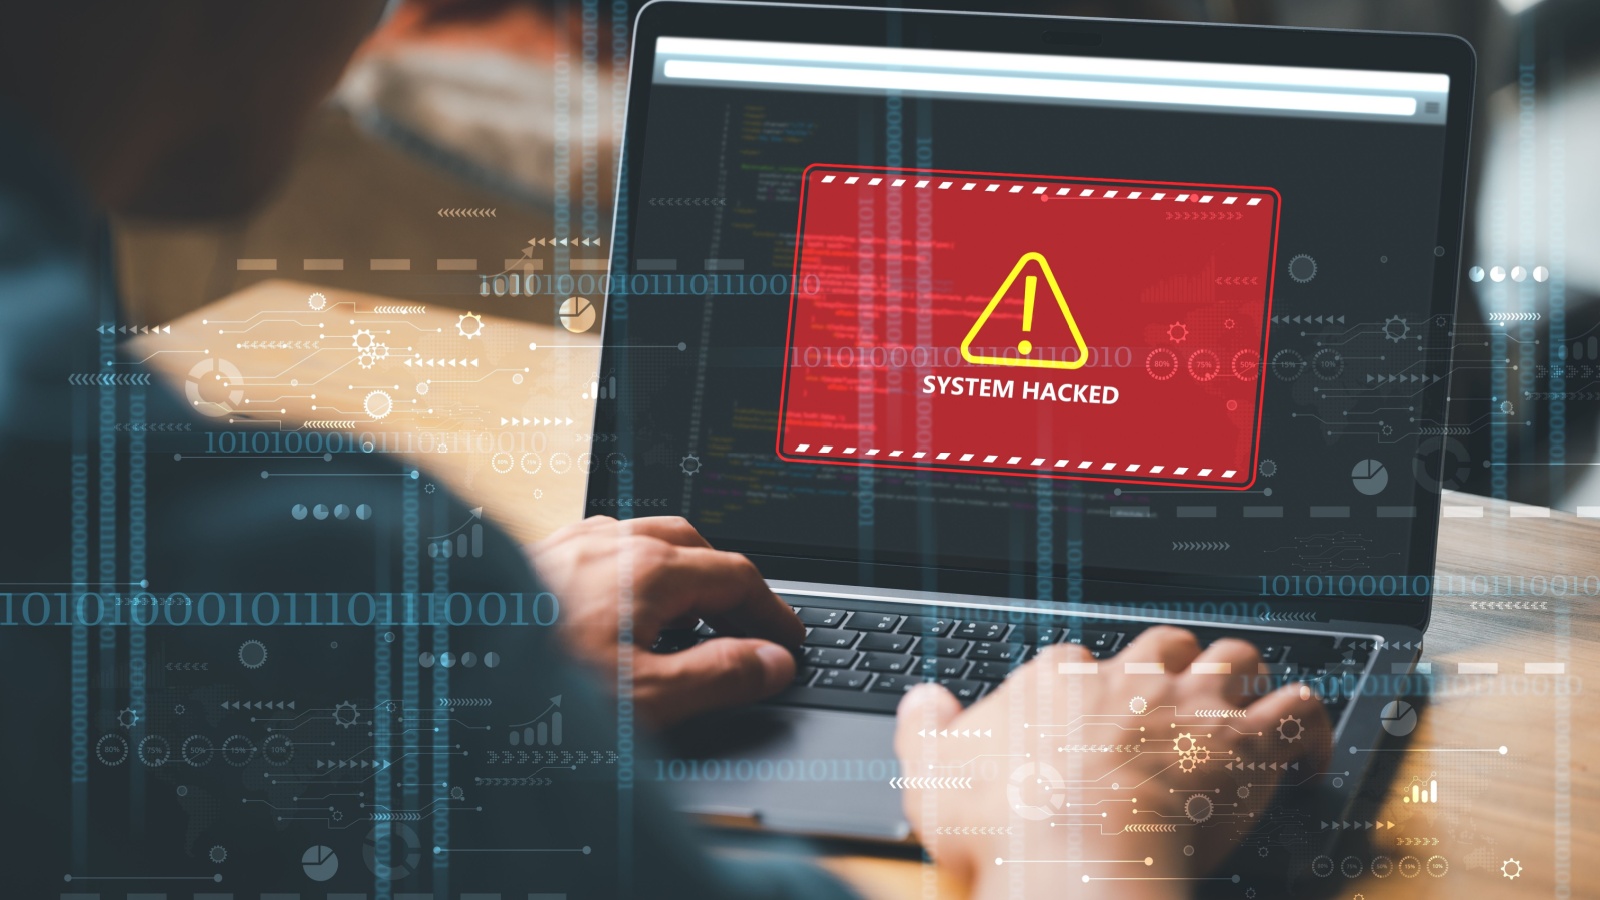 System warning hacked alert, cyber attack on computer network. Cybersecurity vulnerability, data breach, illegal connection, compromised information concept. Malicious software, virus and cybercrime.